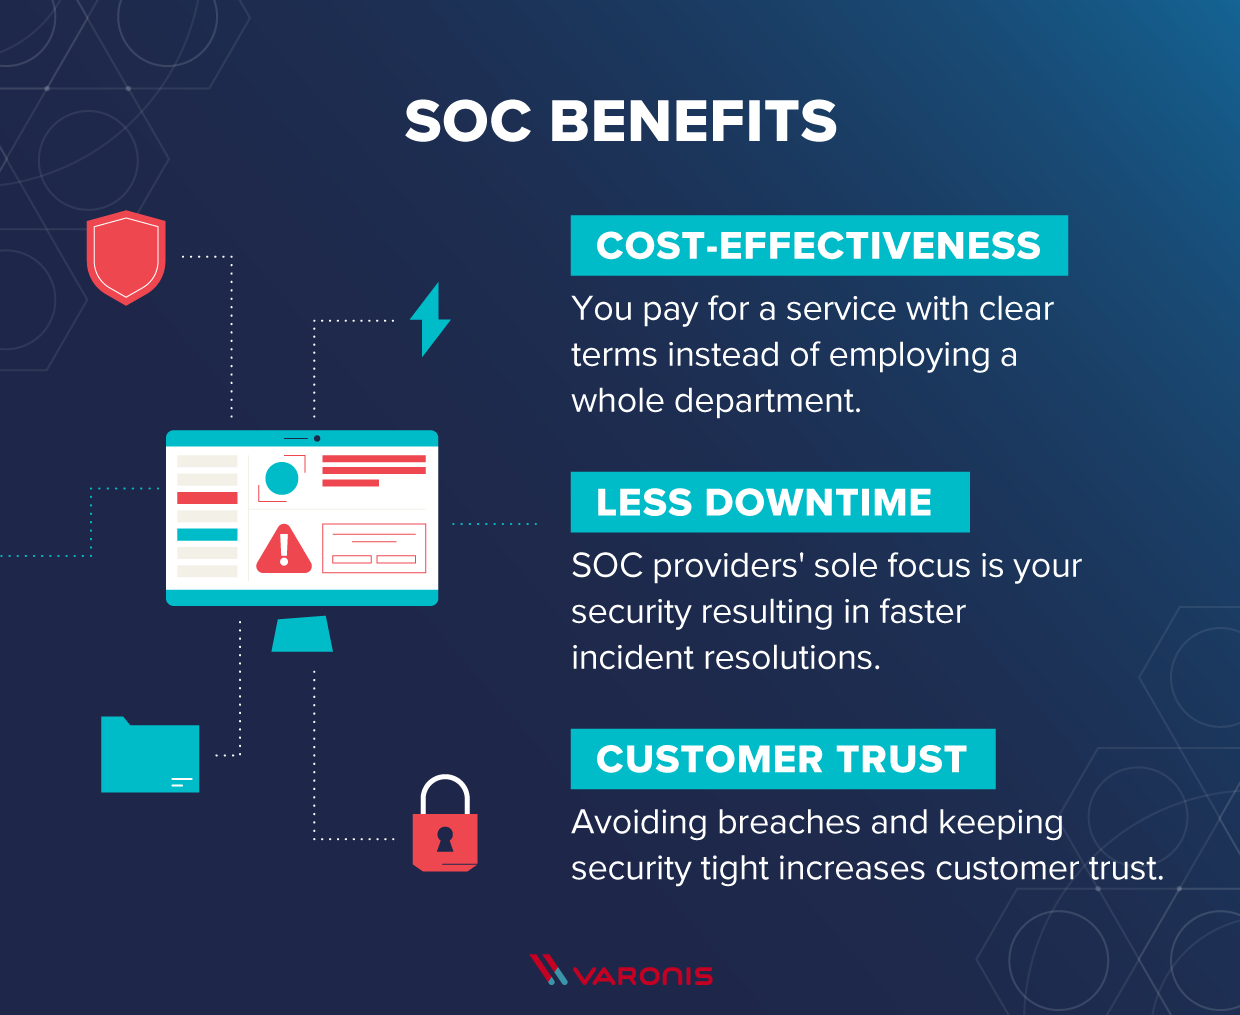 security operation center (soc) illustration of the benefits of SOCs (cost-efficiency, less downtime, better customer trust)